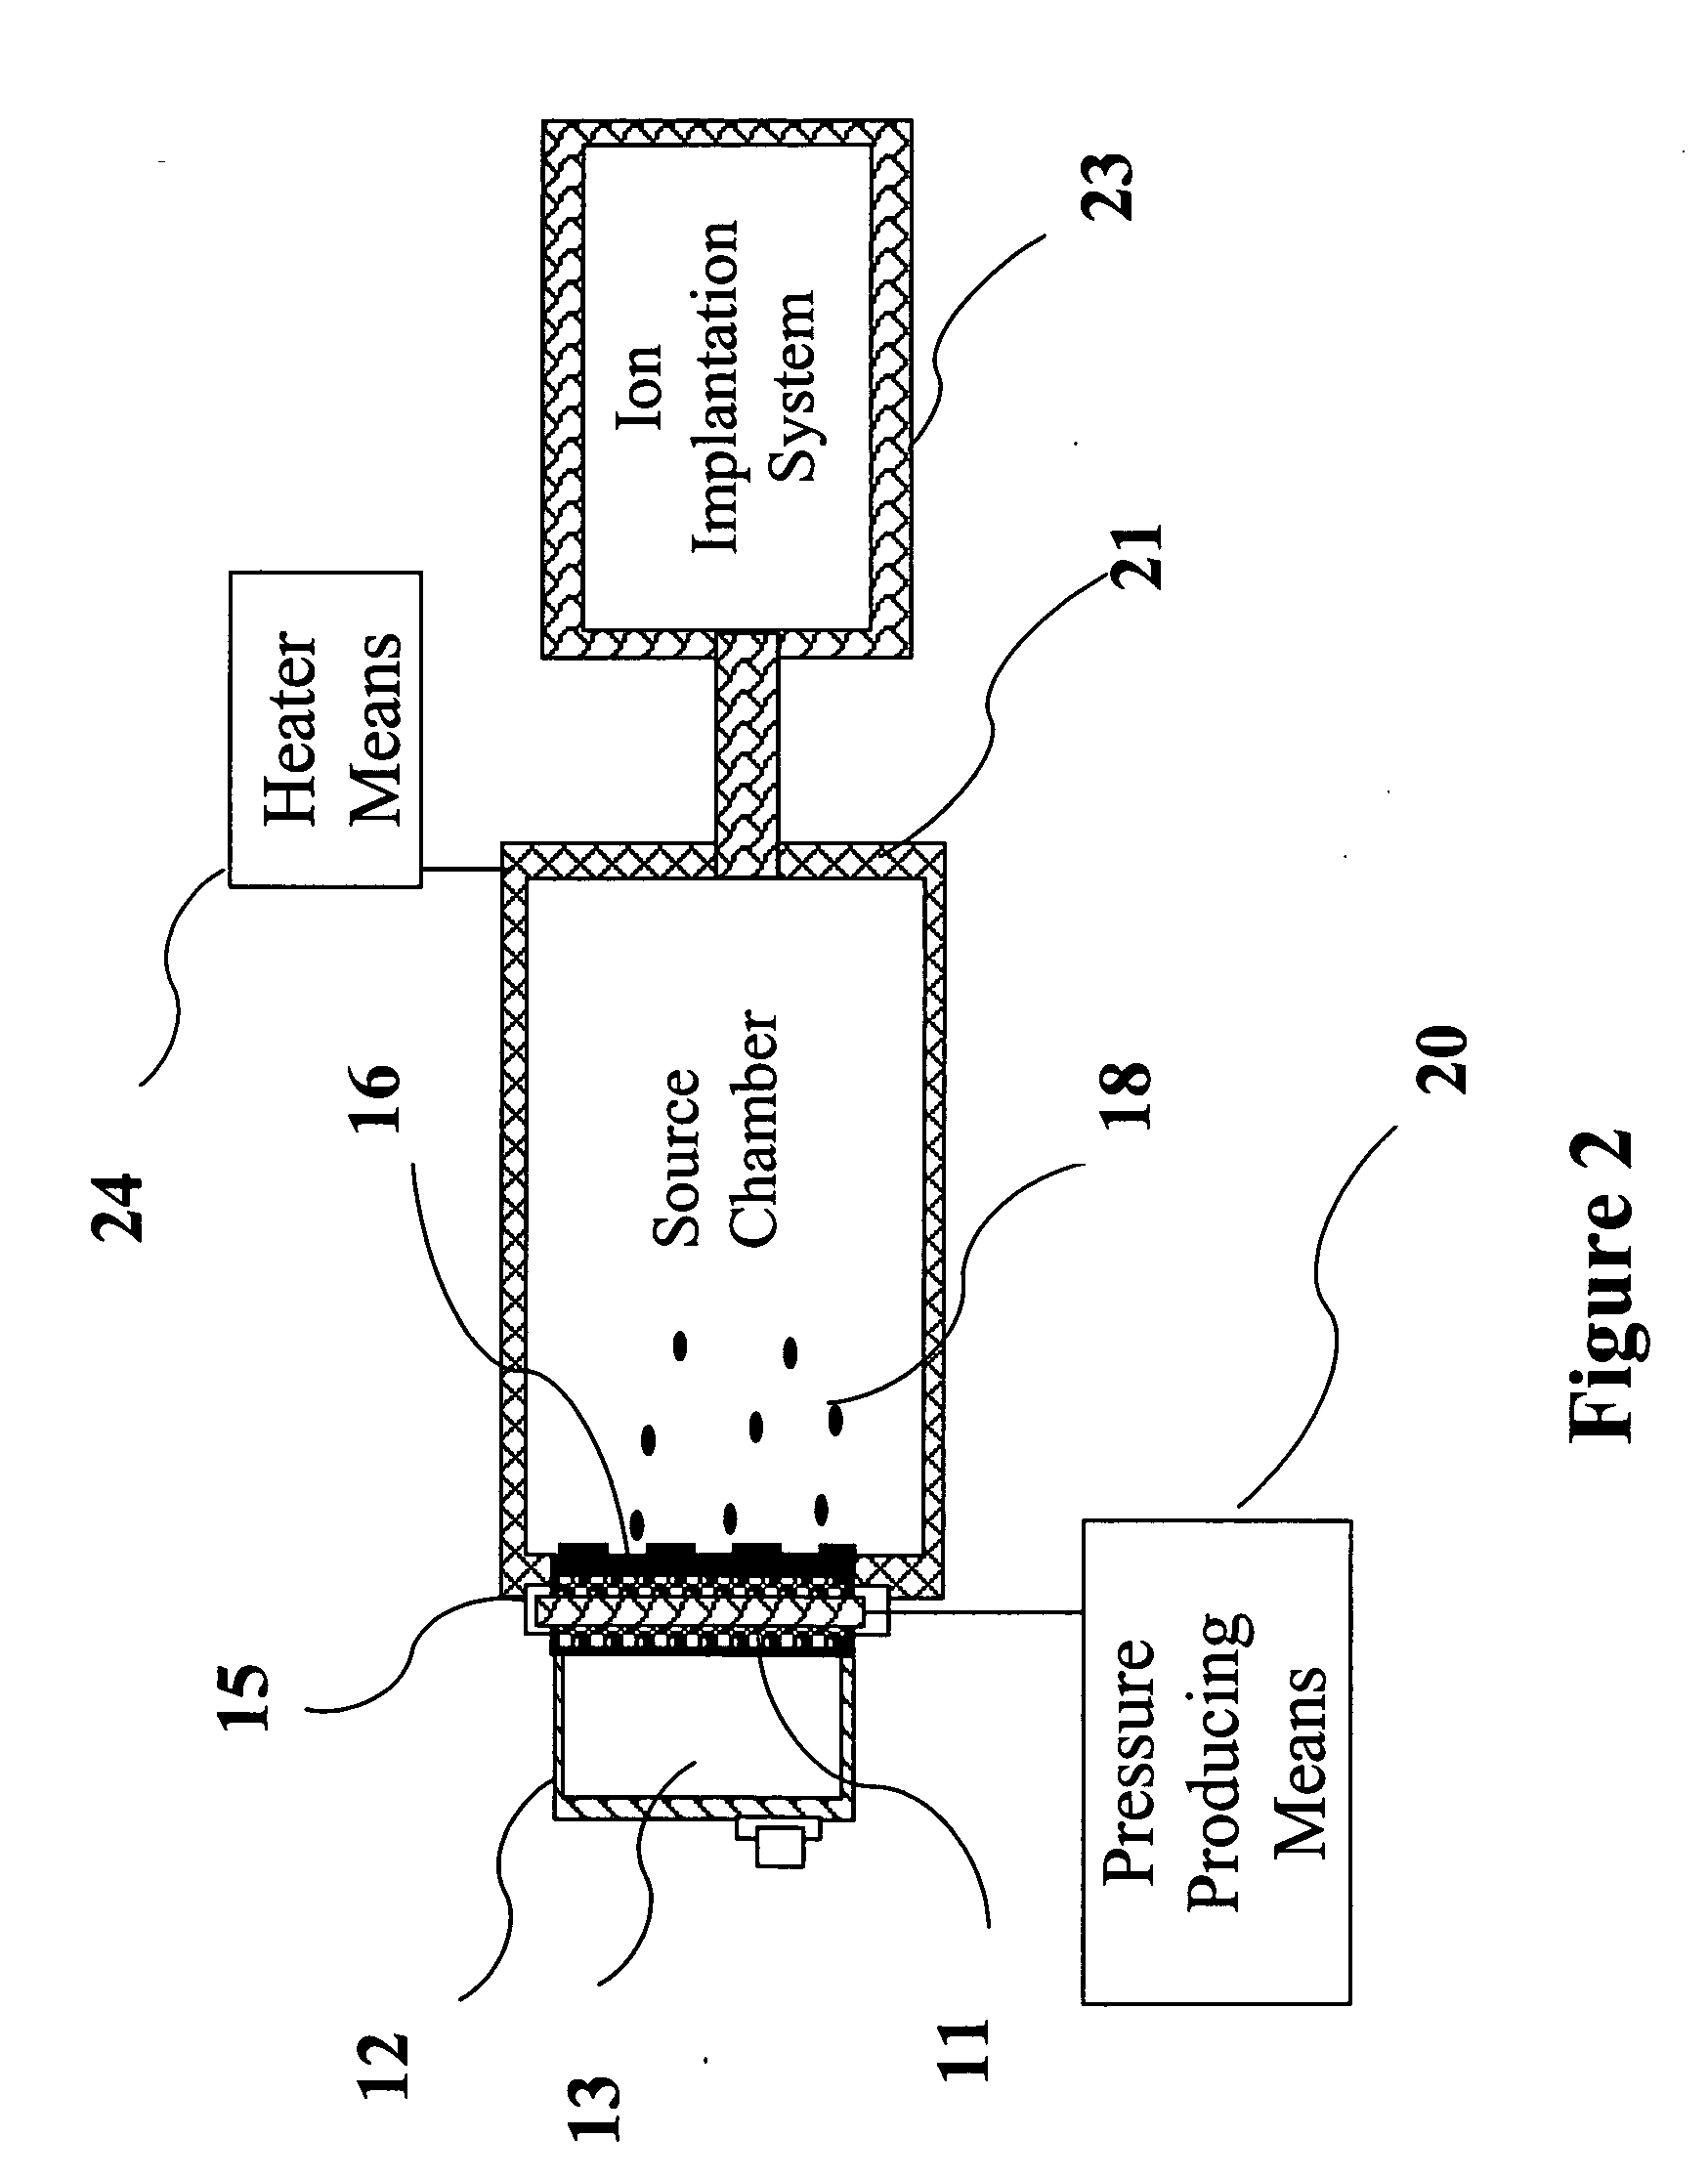 Controlled flow of source material via droplet evaporation